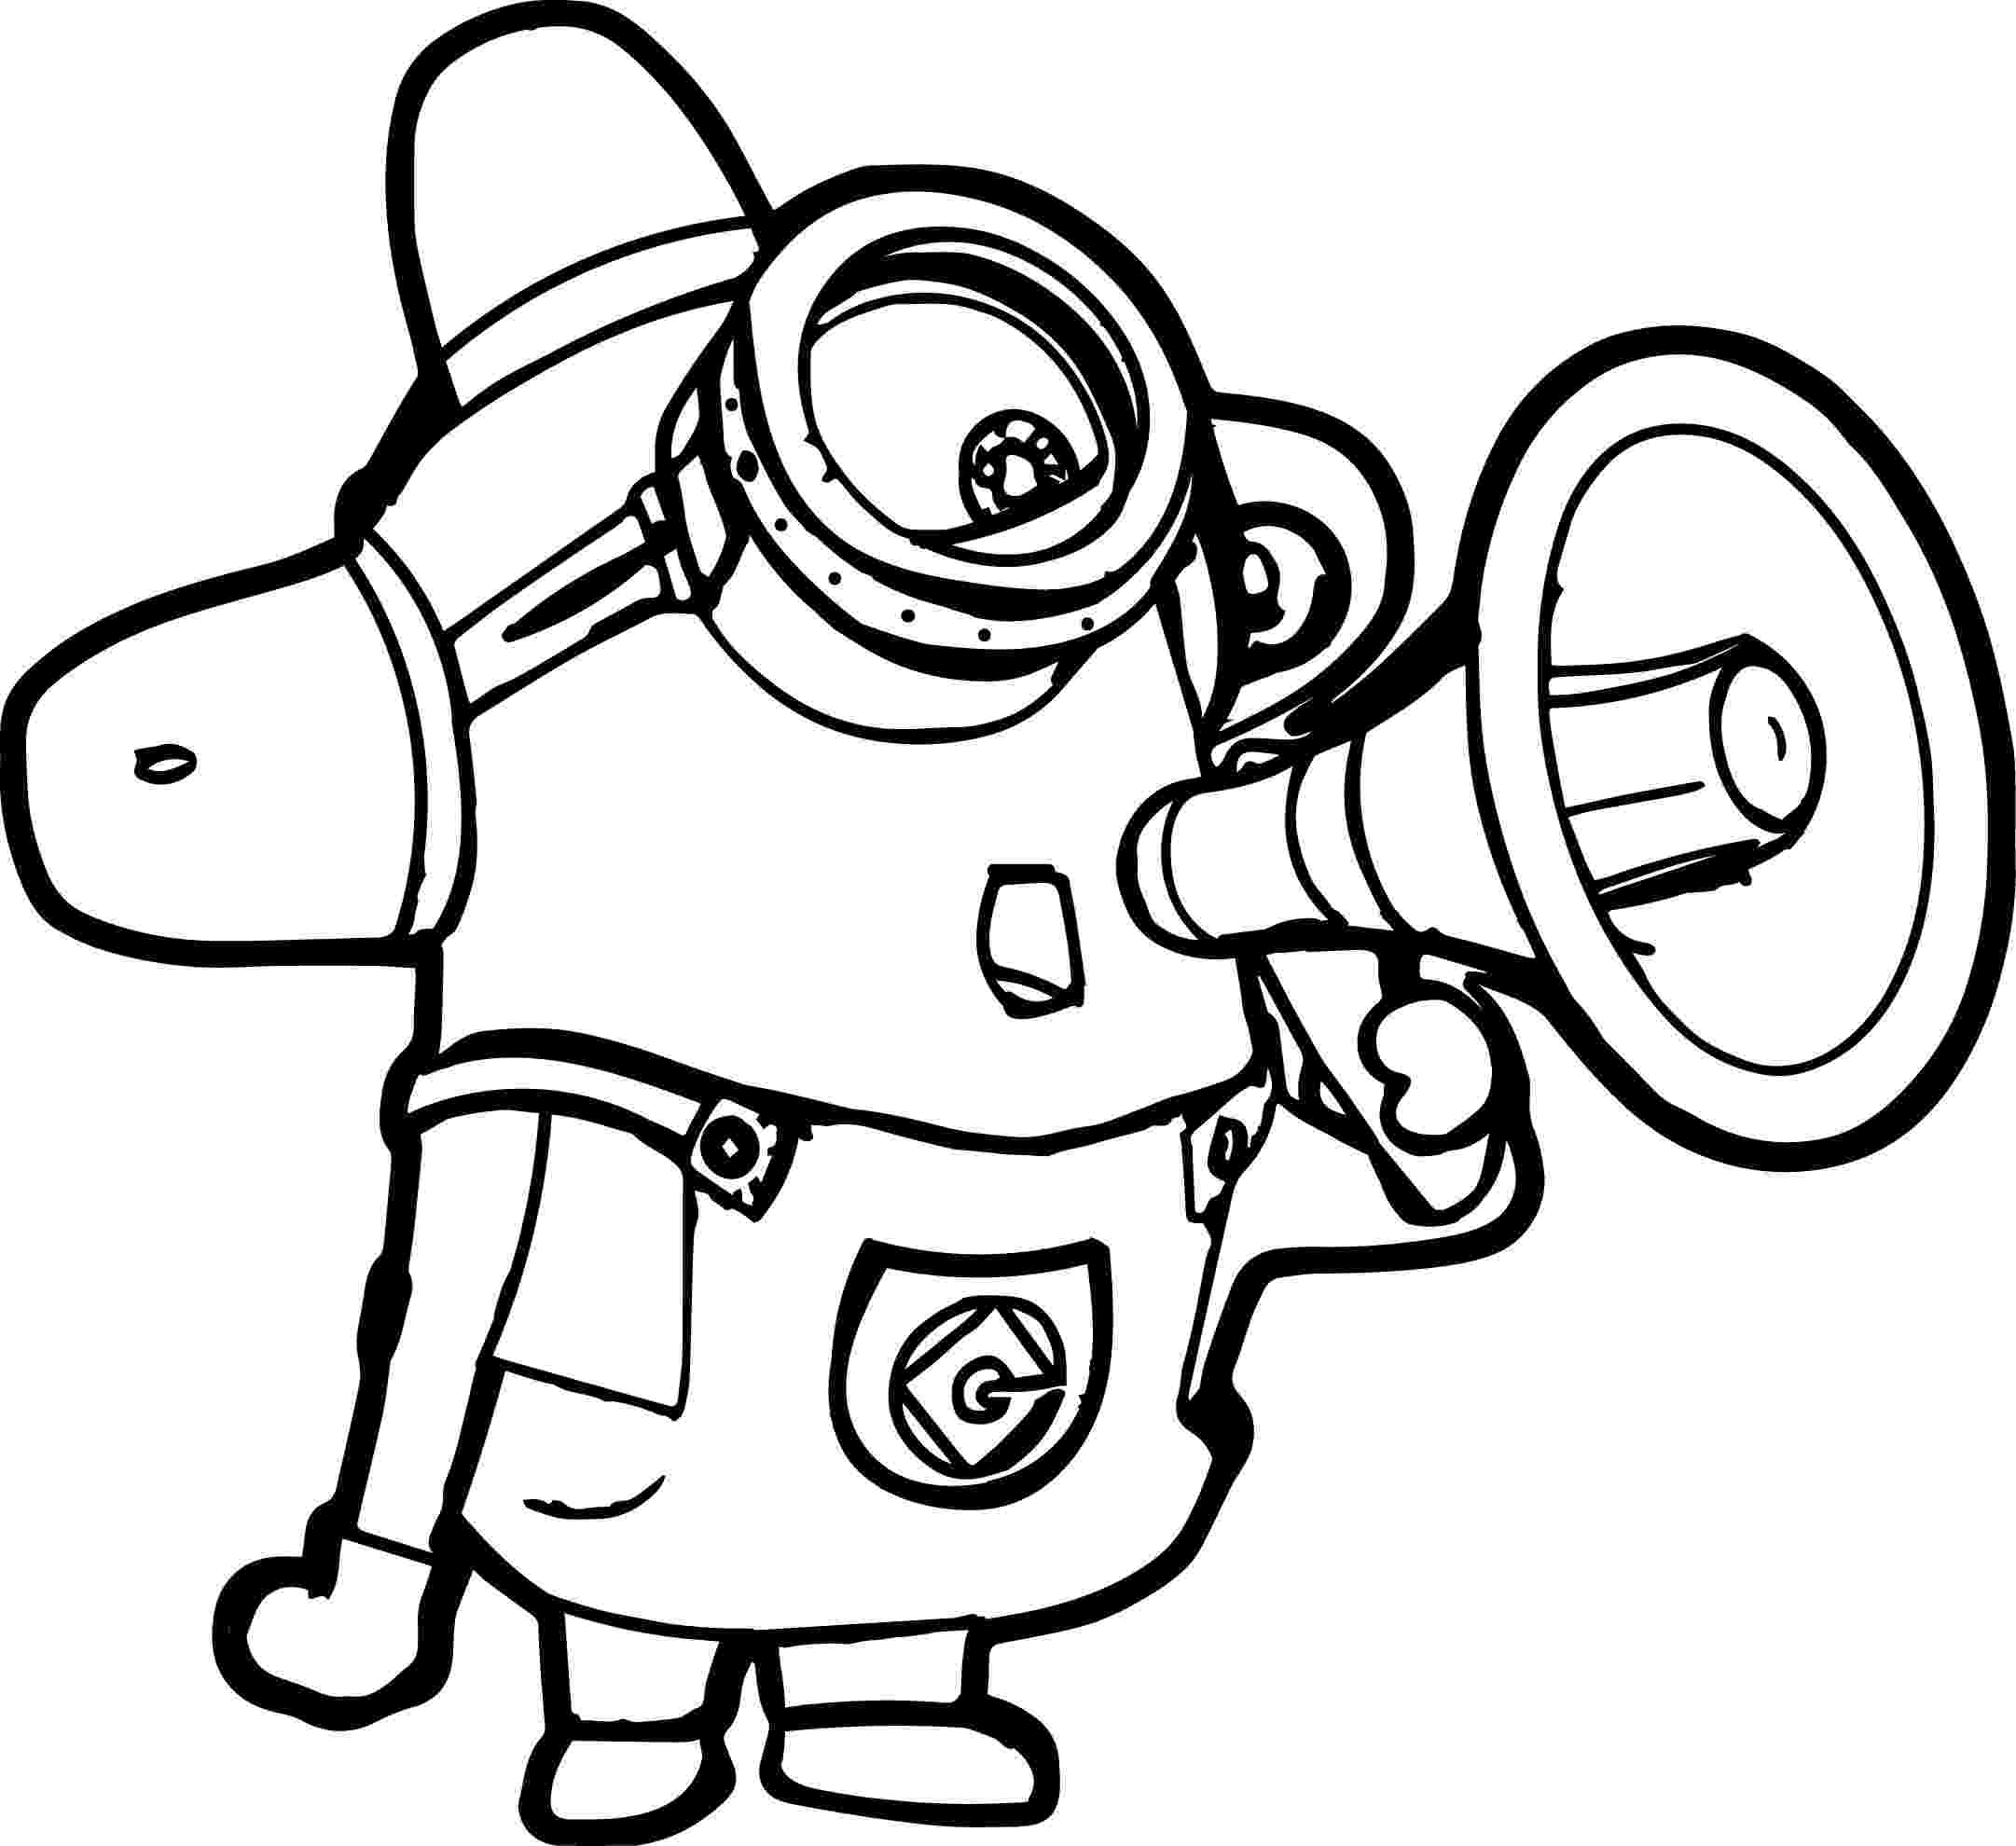 minion pictures to color and print minion coloring pages best coloring pages for kids color print pictures and to minion 